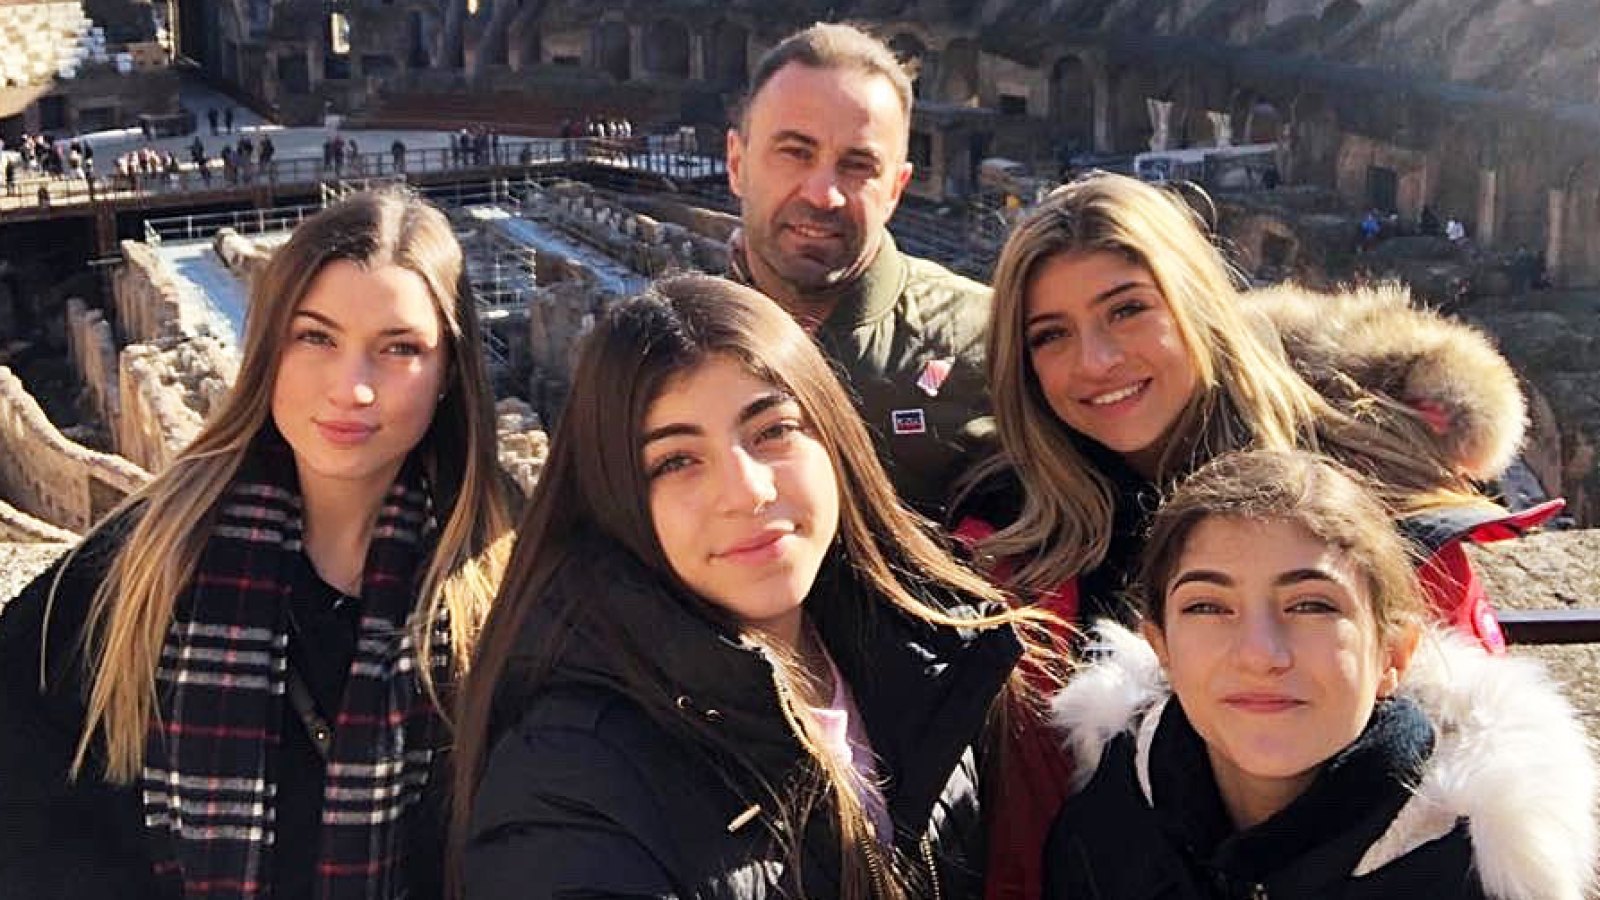 Joe Giudice Shares Video of Himself Eating Sushi With His Daughters